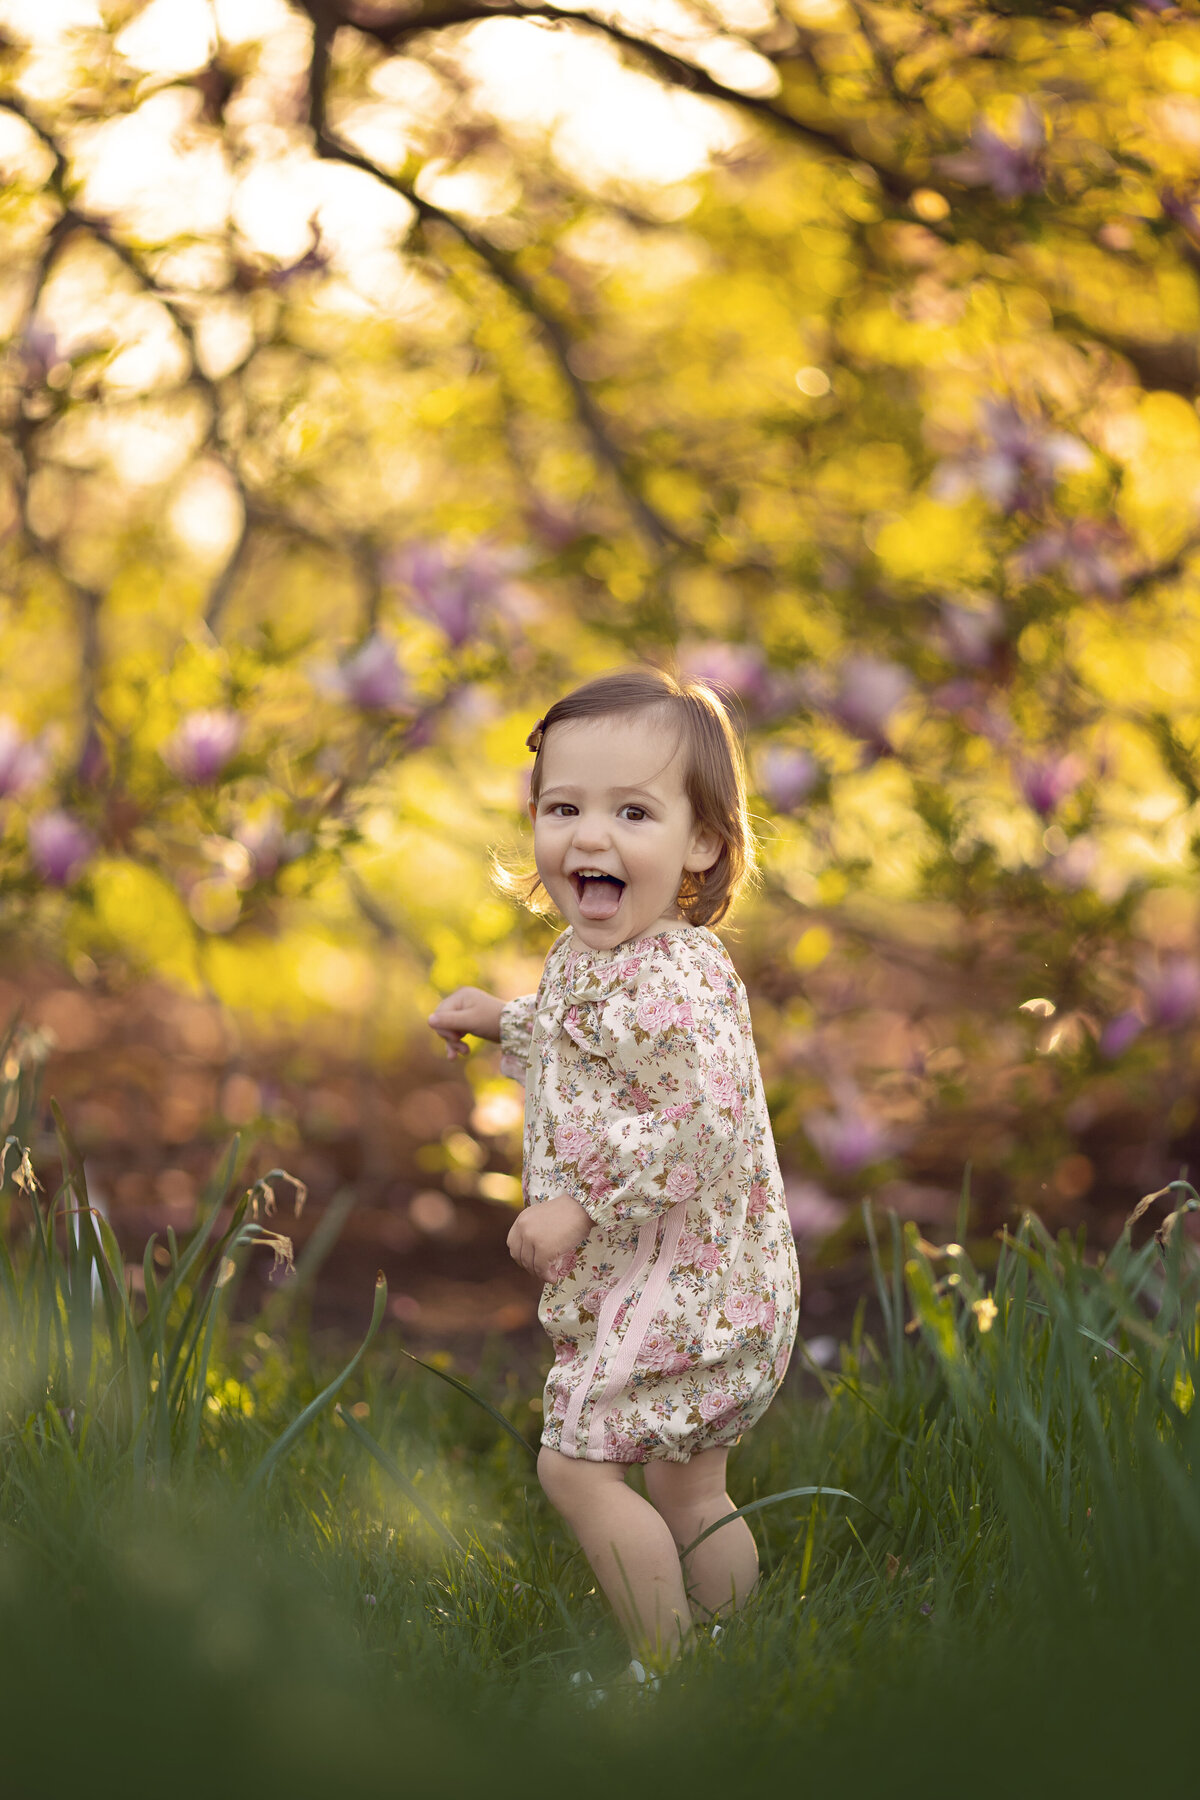 A toddler girl smiles while exploring a grassy lawn at sunset in a floral print dress